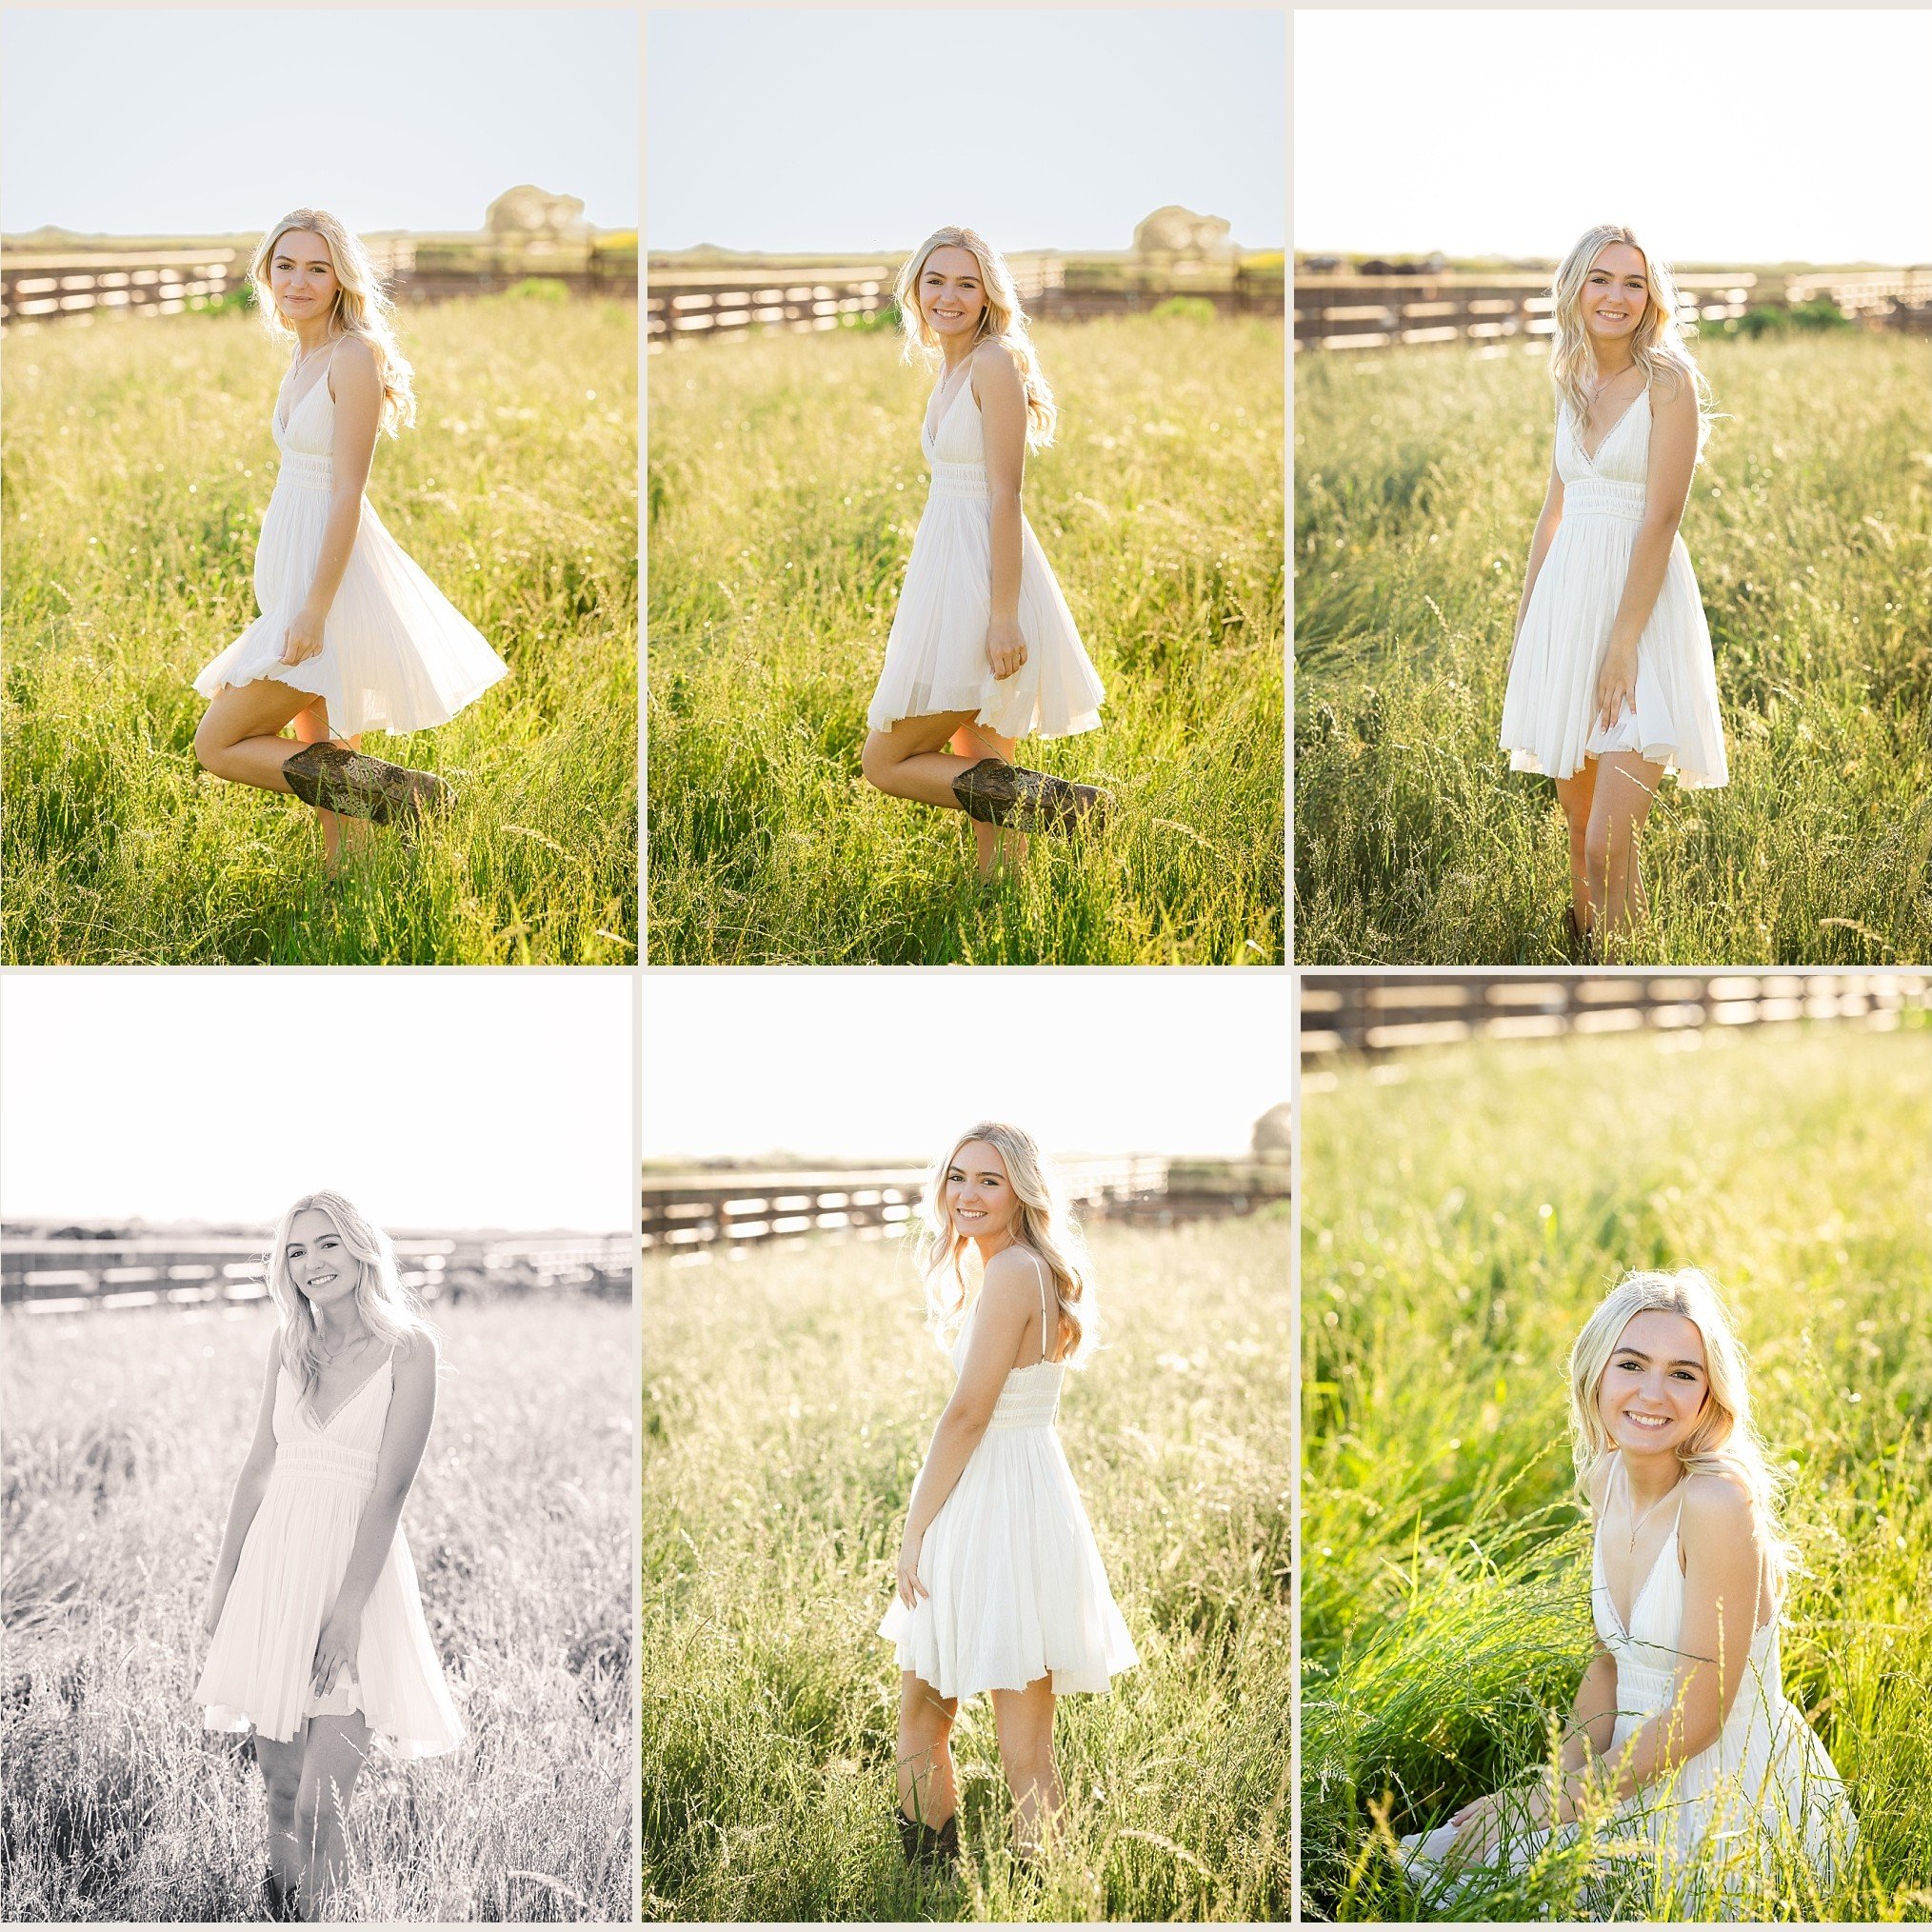 2nd batch of senior photos for Presley Clement!
@presleyclement